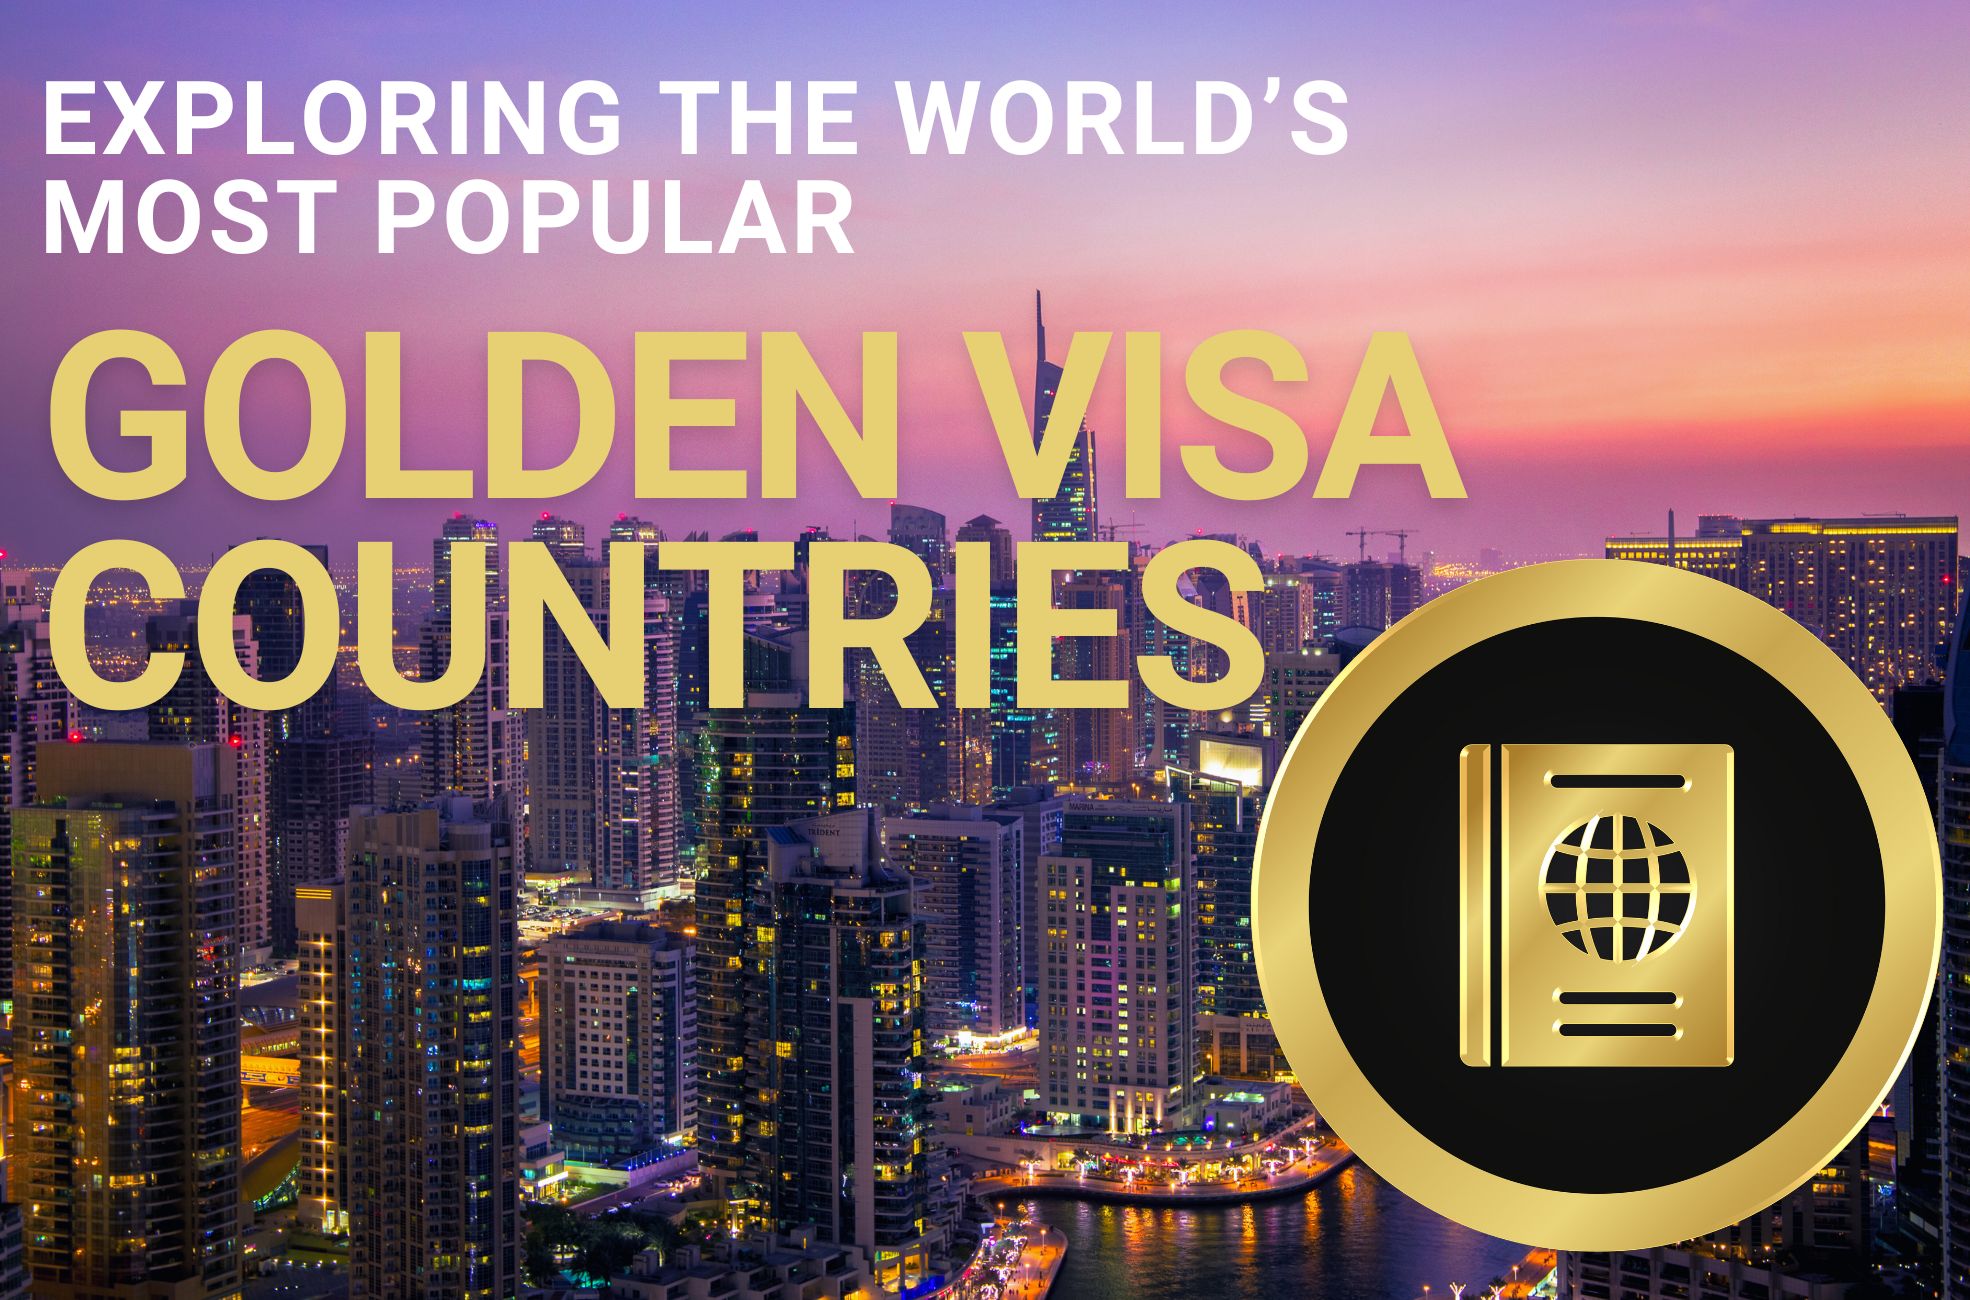 Title Page Saying "Exploring The World's Most Popular Golden Visa Countries"